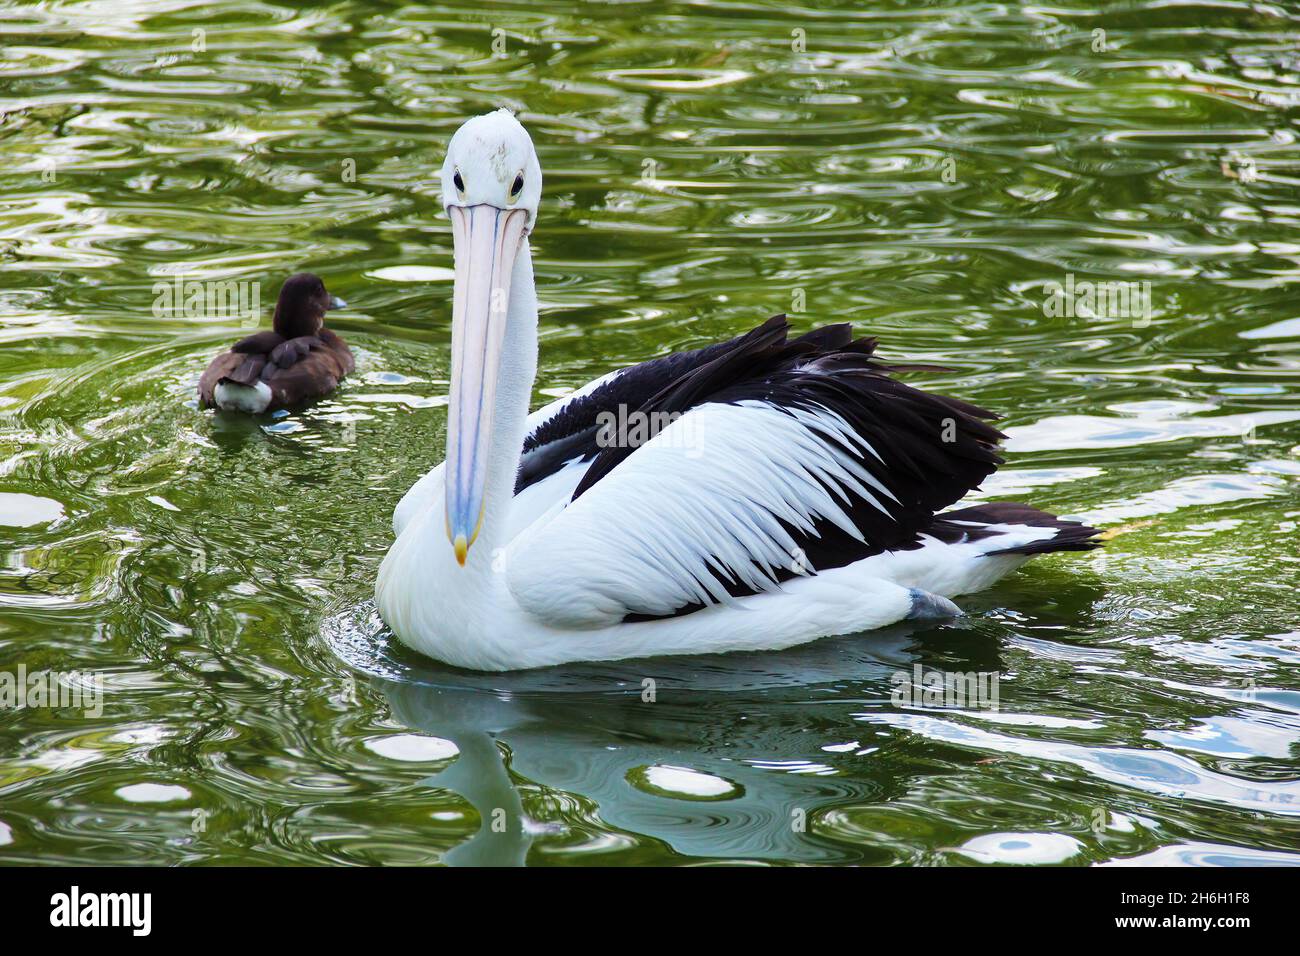 Black and white Australian Pelican floating in a lake in Adelaide, Australia. Pelicans are a genus of large water birds that makes up the family Pelec Stock Photo